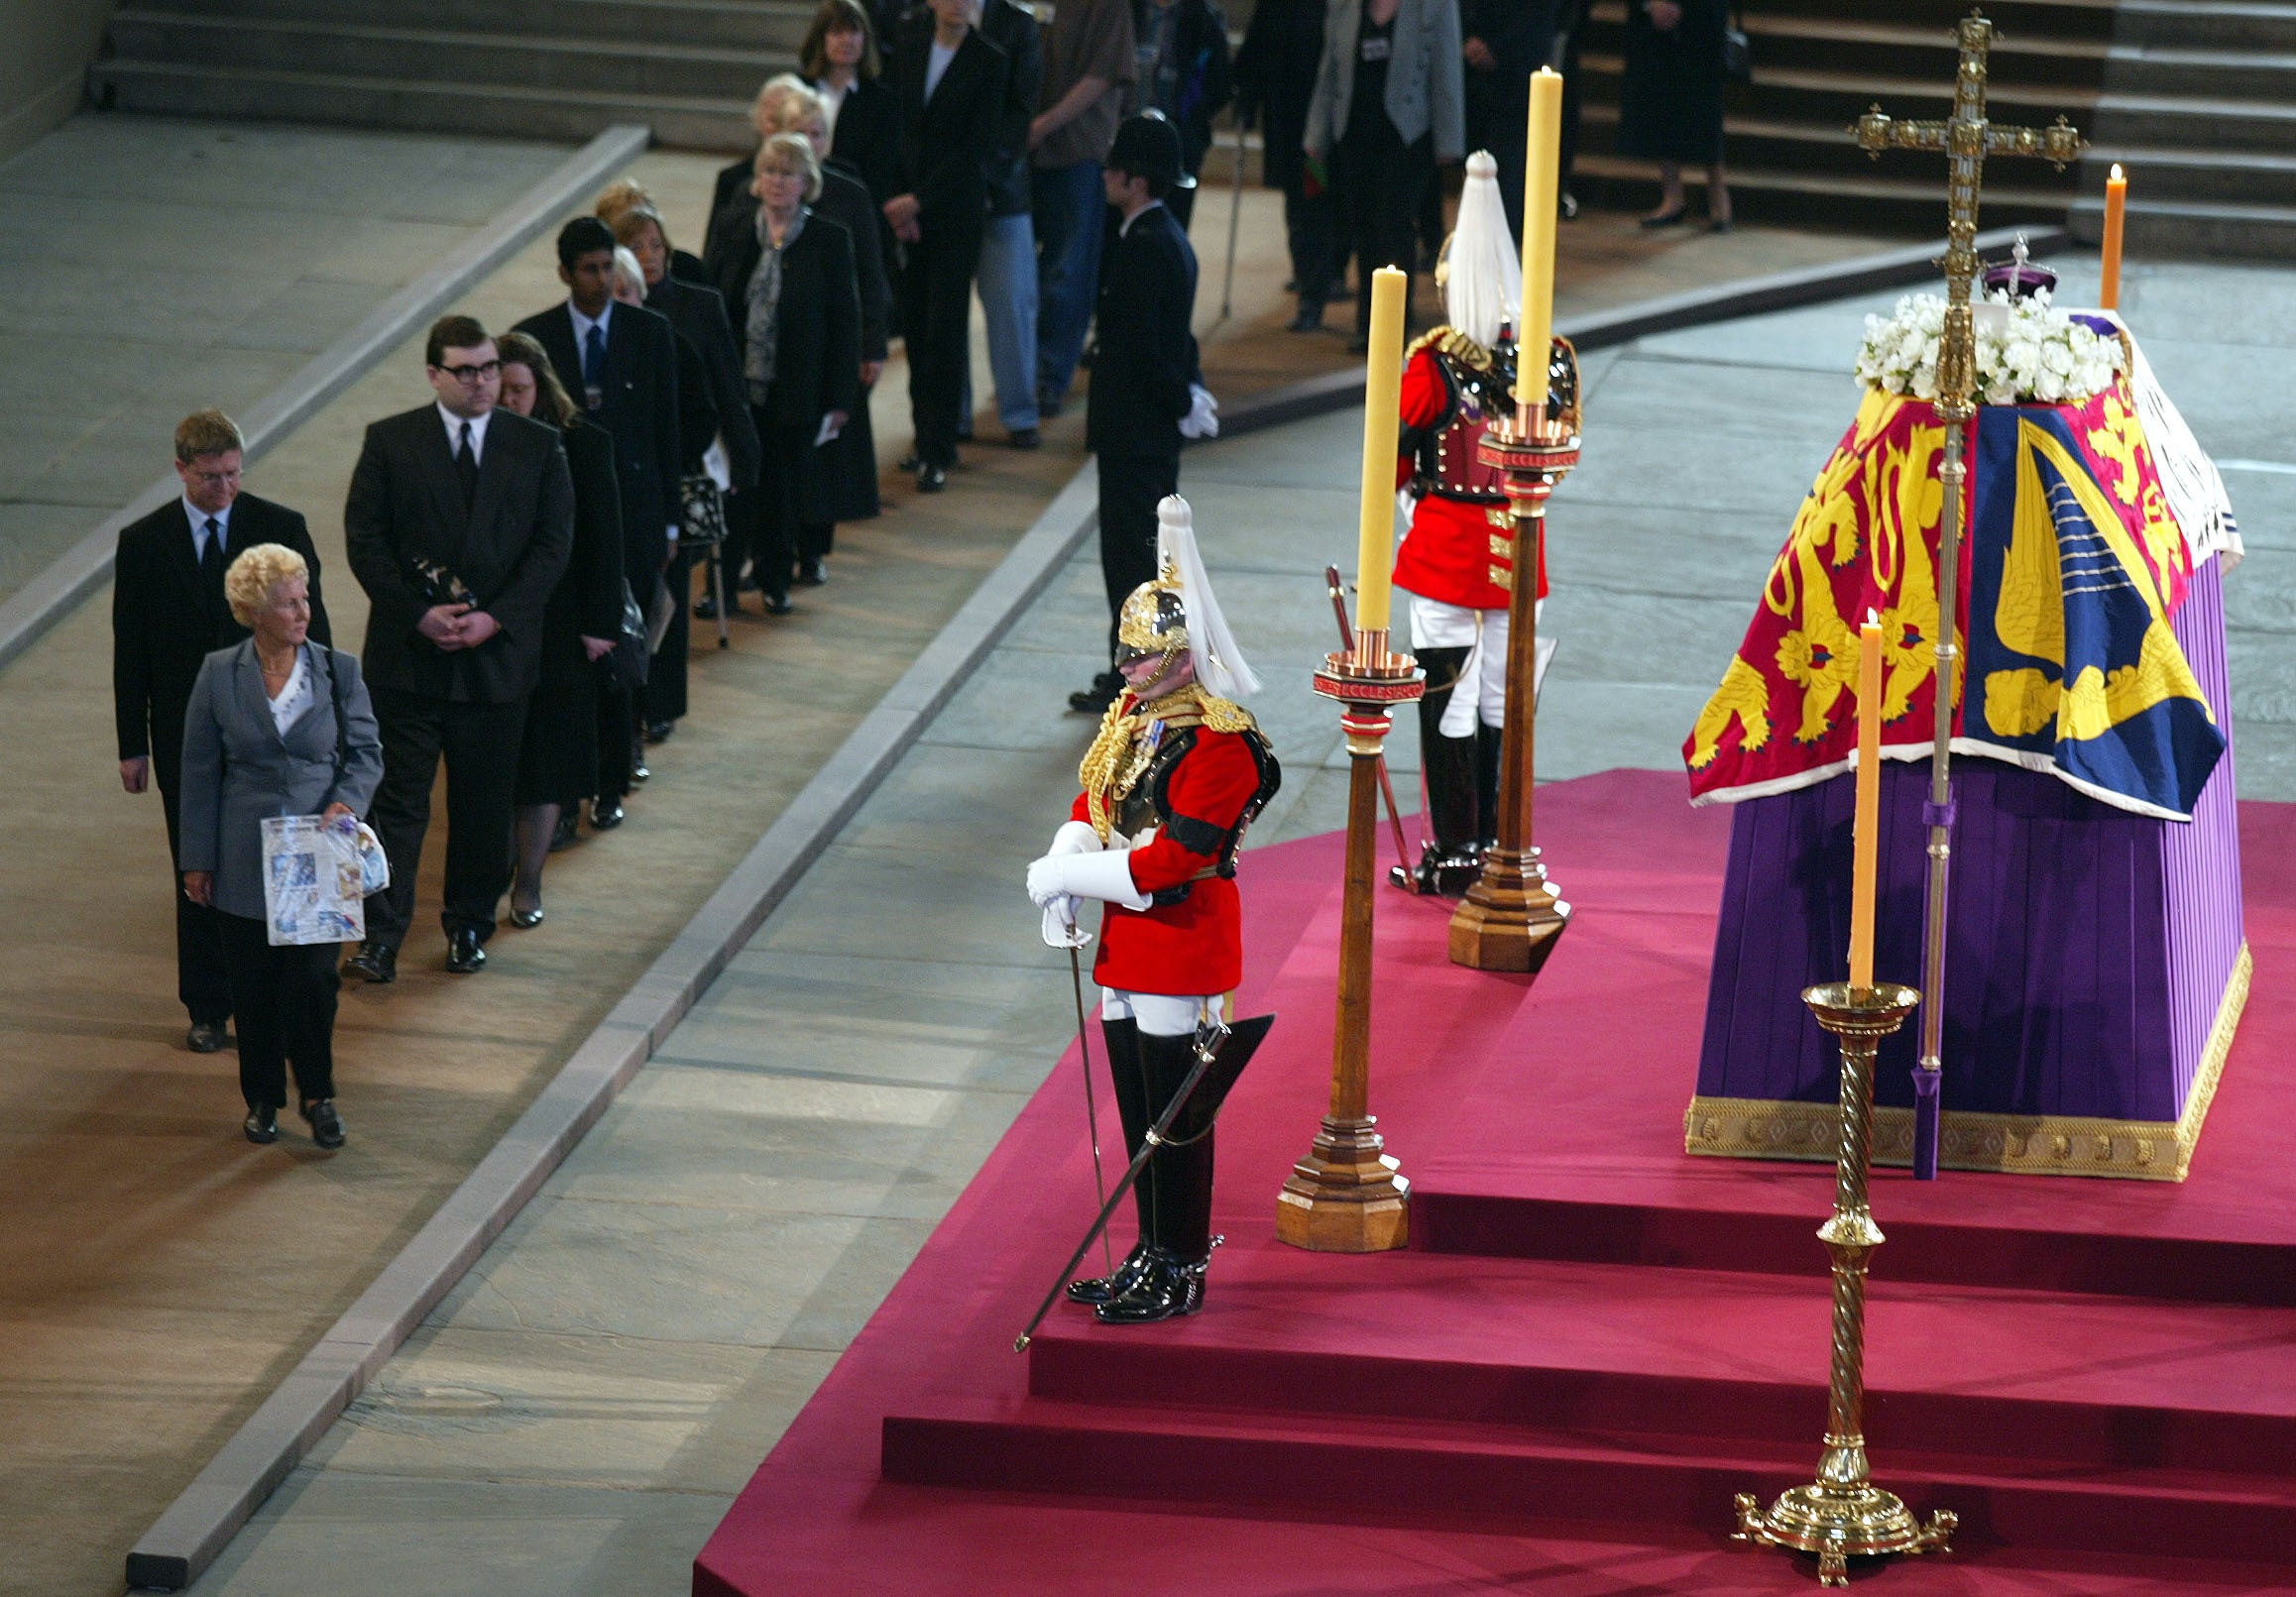 Mourners filing past the coffin of Queen Elizabeth, the Queen Mother, in Westminster Hall in 2002 (Phil Noble/PA)